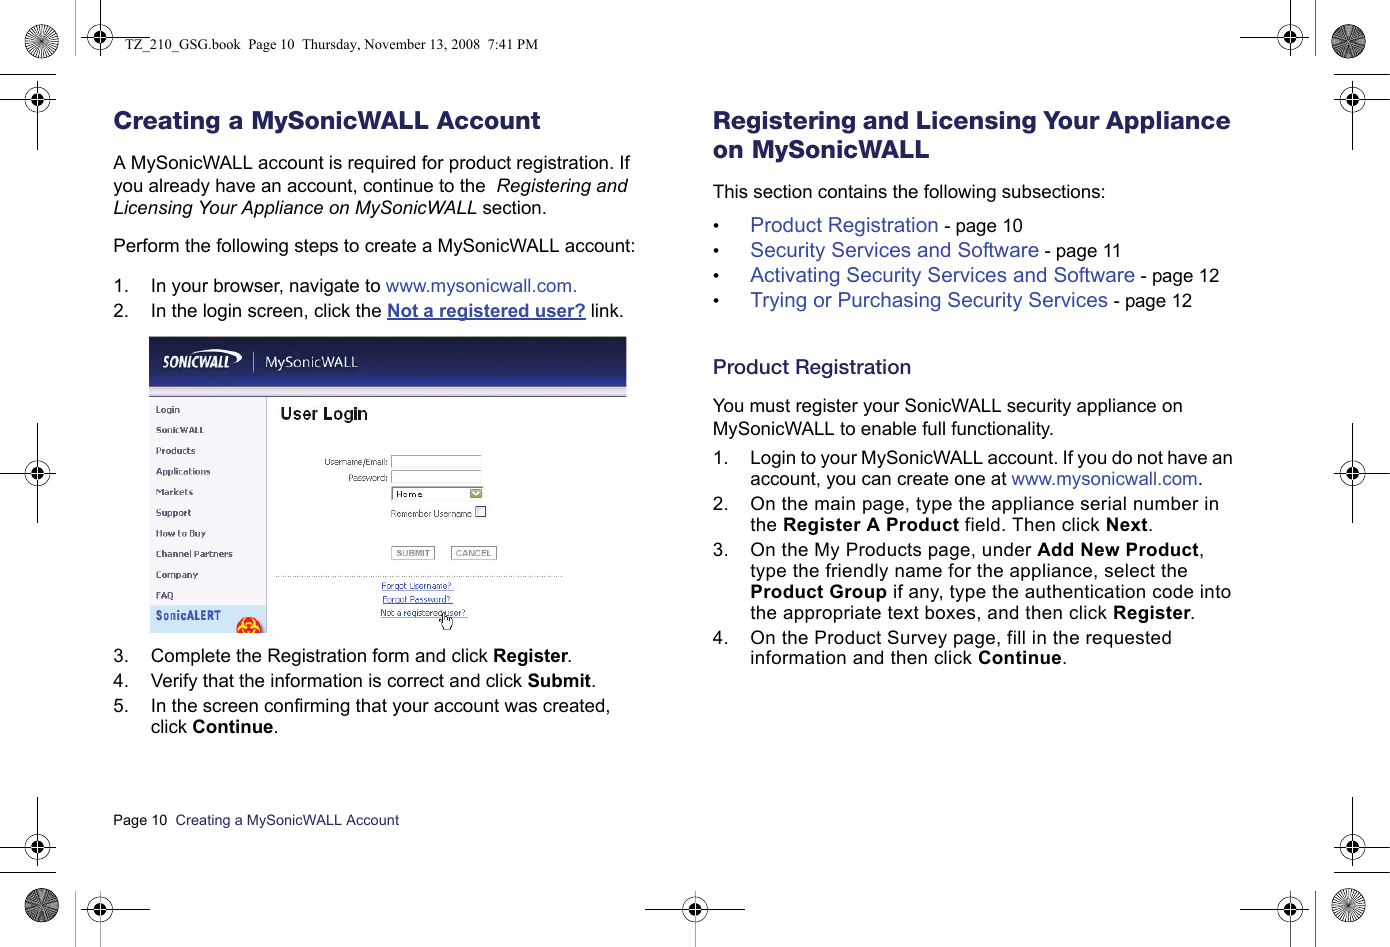 Page 10  Creating a MySonicWALL Account  Creating a MySonicWALL AccountA MySonicWALL account is required for product registration. If you already have an account, continue to the  Registering and Licensing Your Appliance on MySonicWALL section.Perform the following steps to create a MySonicWALL account:1. In your browser, navigate to www.mysonicwall.com.2. In the login screen, click the Not a registered user? link.3. Complete the Registration form and click Register.4. Verify that the information is correct and click Submit.5. In the screen confirming that your account was created, click Continue.Registering and Licensing Your Appliance on MySonicWALLThis section contains the following subsections:•Product Registration - page 10•Security Services and Software - page 11•Activating Security Services and Software - page 12•Trying or Purchasing Security Services - page 12Product RegistrationYou must register your SonicWALL security appliance on MySonicWALL to enable full functionality.1. Login to your MySonicWALL account. If you do not have an account, you can create one at www.mysonicwall.com.2. On the main page, type the appliance serial number in the Register A Product field. Then click Next.3. On the My Products page, under Add New Product, type the friendly name for the appliance, select the Product Group if any, type the authentication code into the appropriate text boxes, and then click Register.4. On the Product Survey page, fill in the requested information and then click Continue.TZ_210_GSG.book  Page 10  Thursday, November 13, 2008  7:41 PM